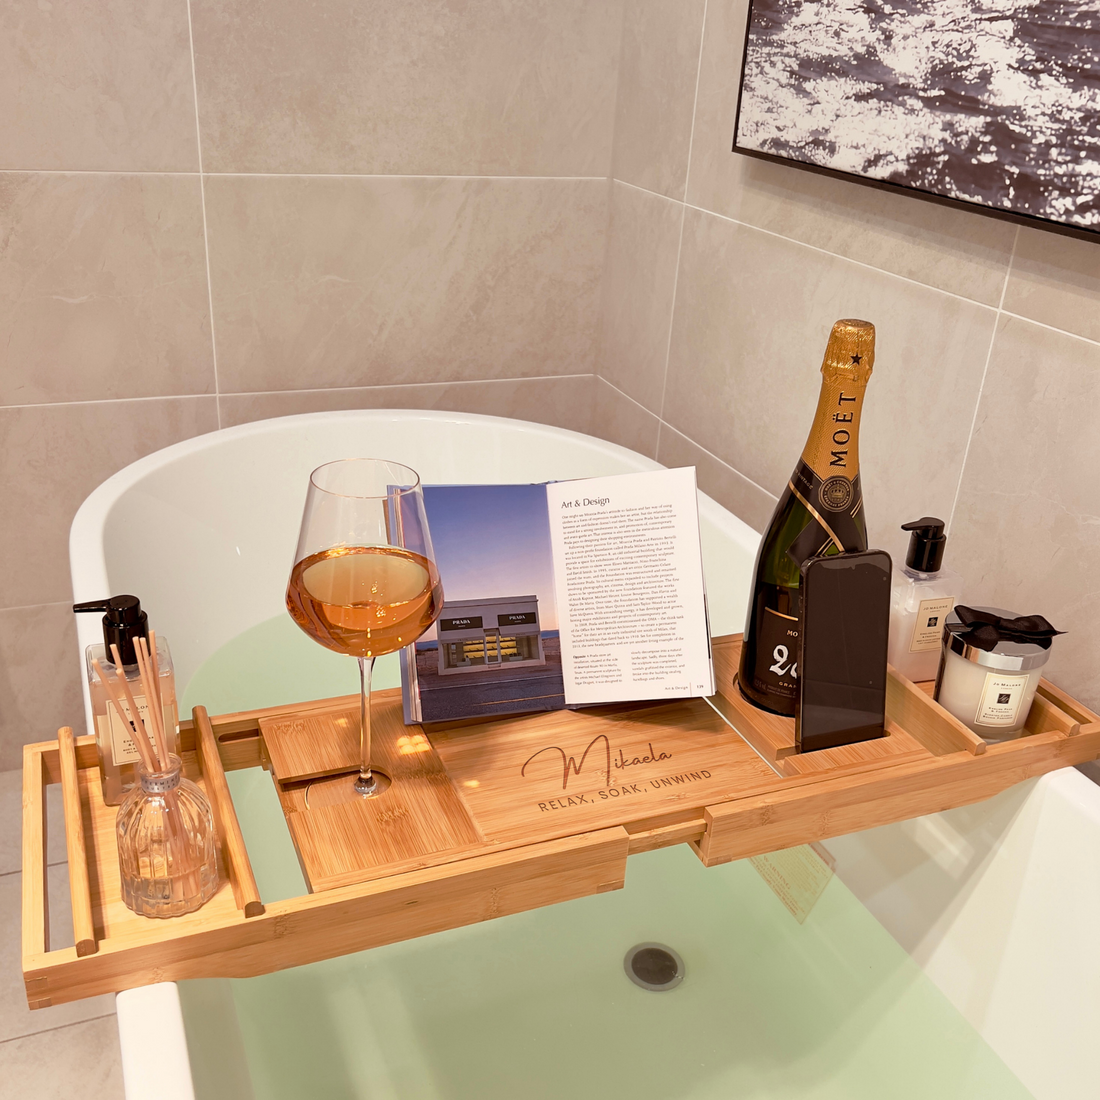 Personalised Bamboo Extendable Bath Caddy Tray, Custom Engraved Wooden Adjustable Spa Bathtub Storage Rack with Phone Slot, Candle, Wine Glass Holder, Tablet/Ipad/Book Holder